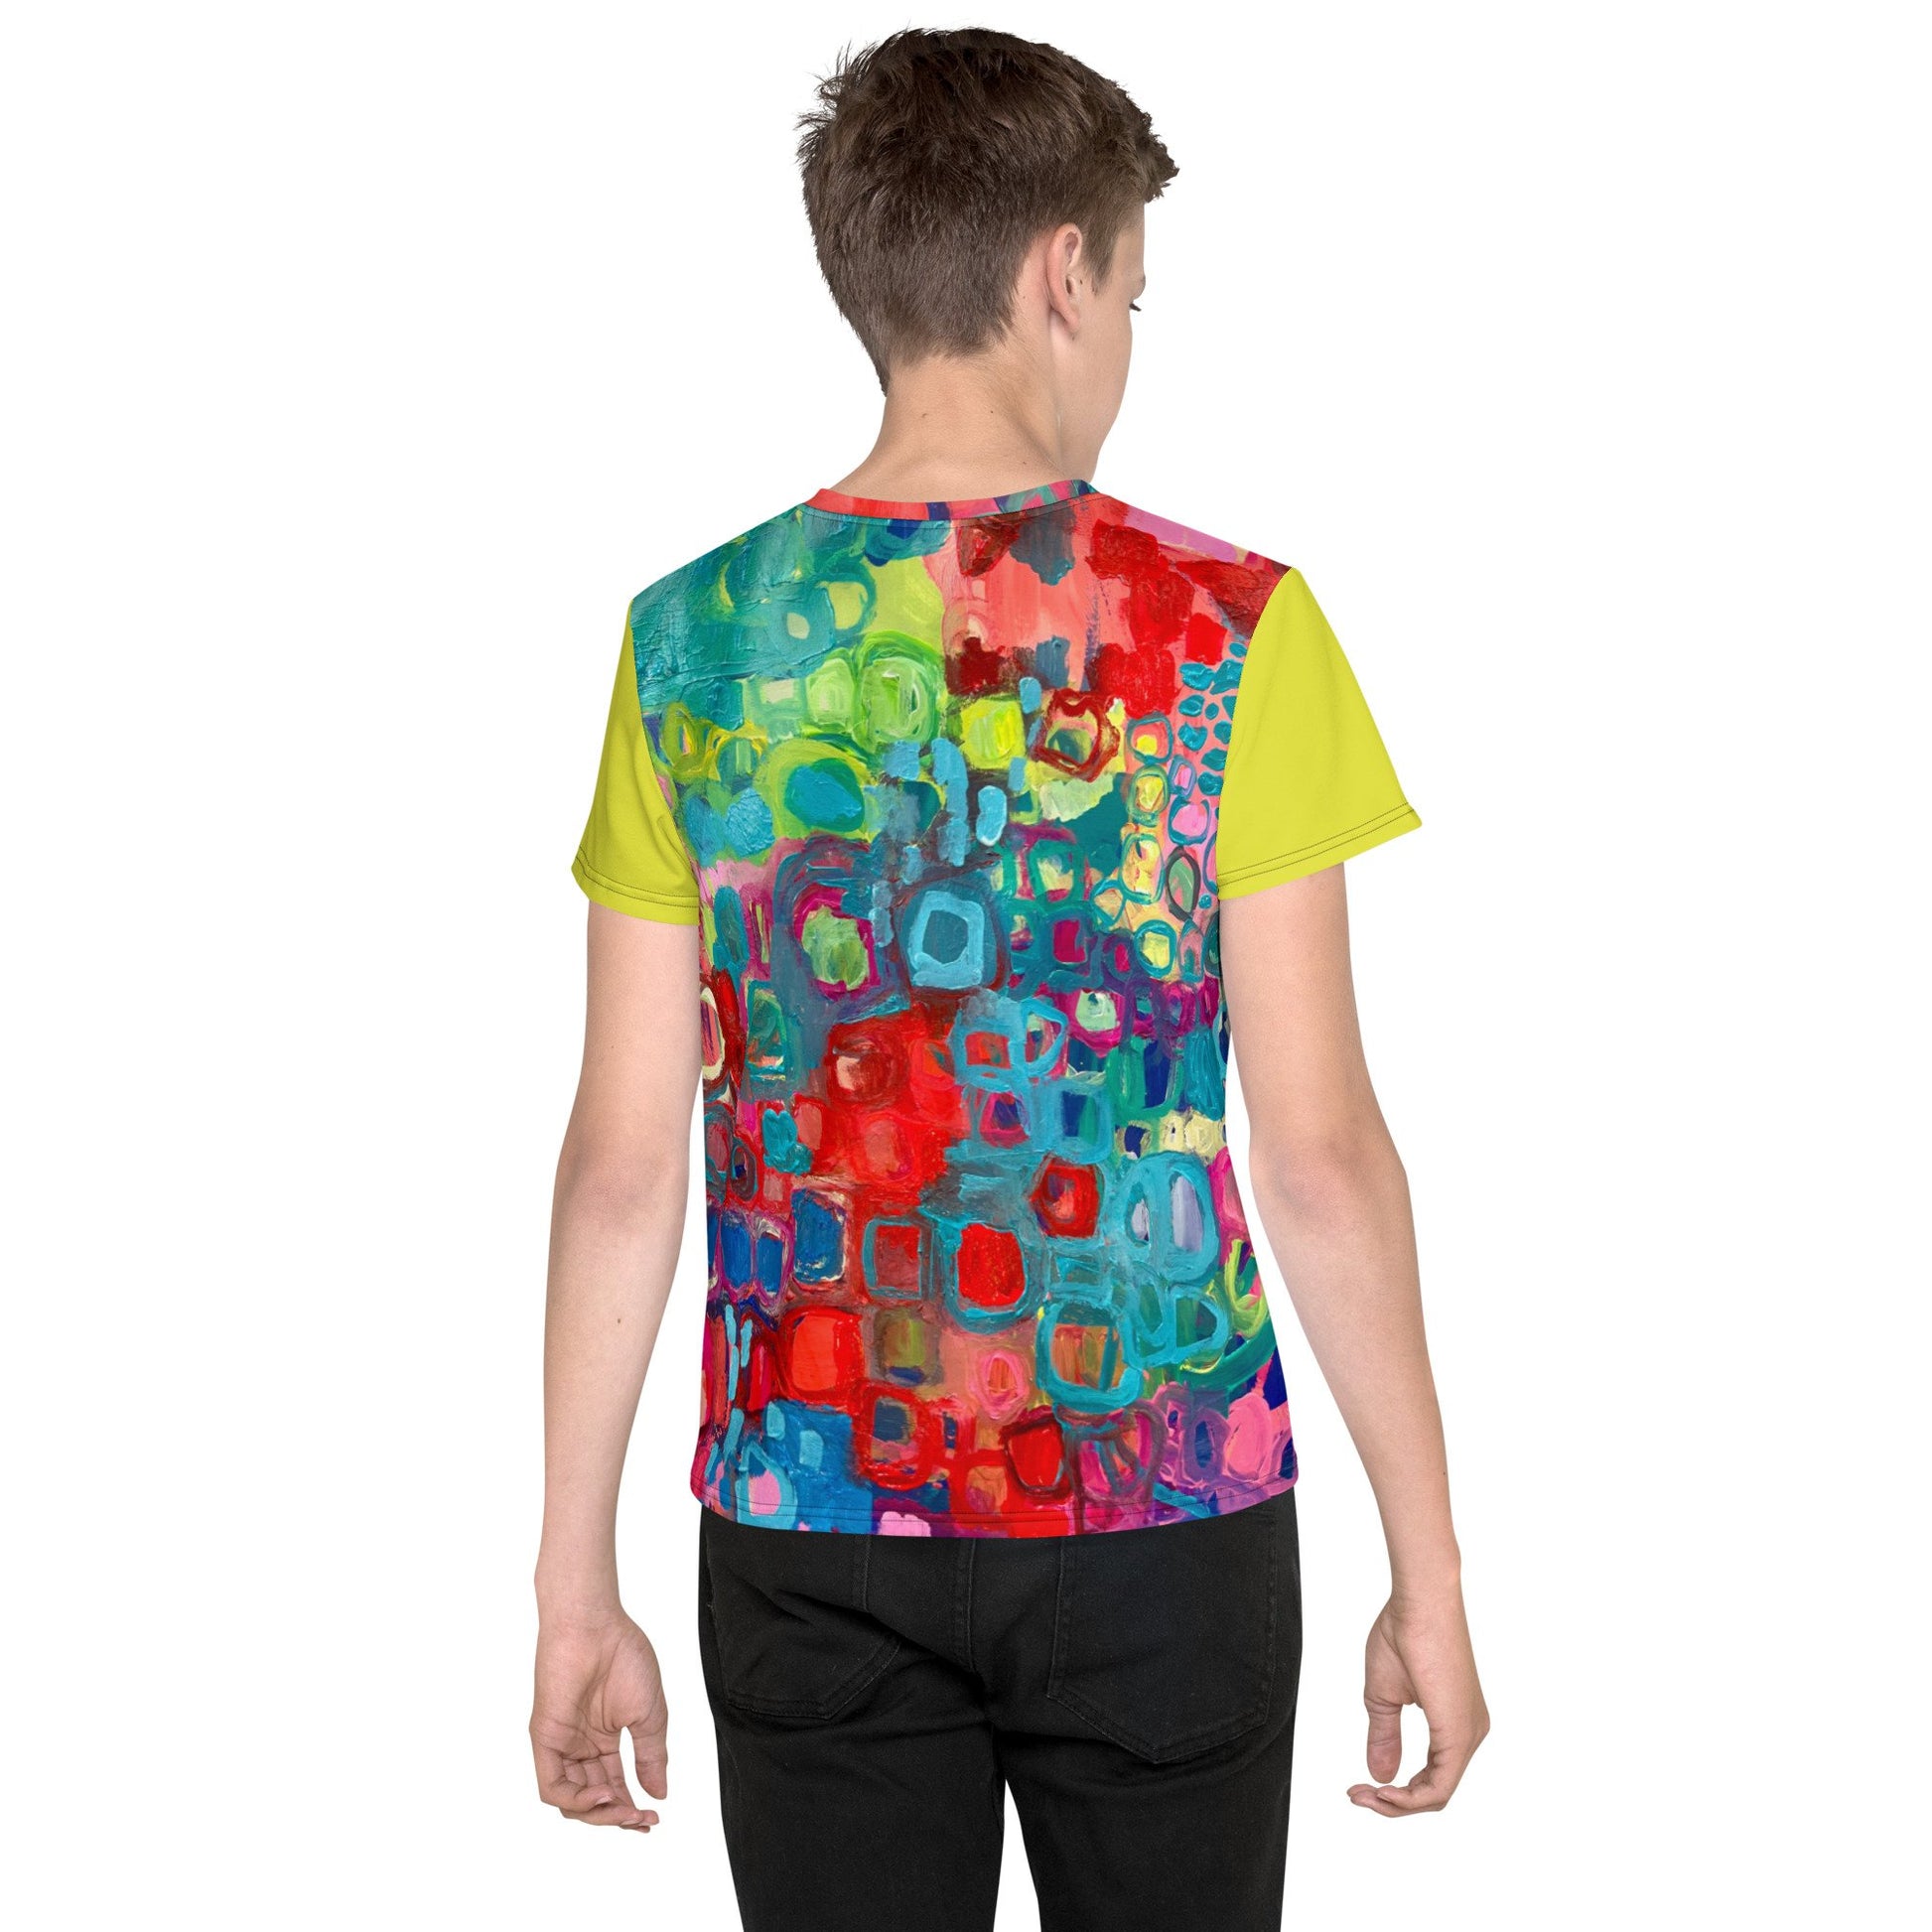 Vibrancy for Your Life - Youth crew neck t-shirt